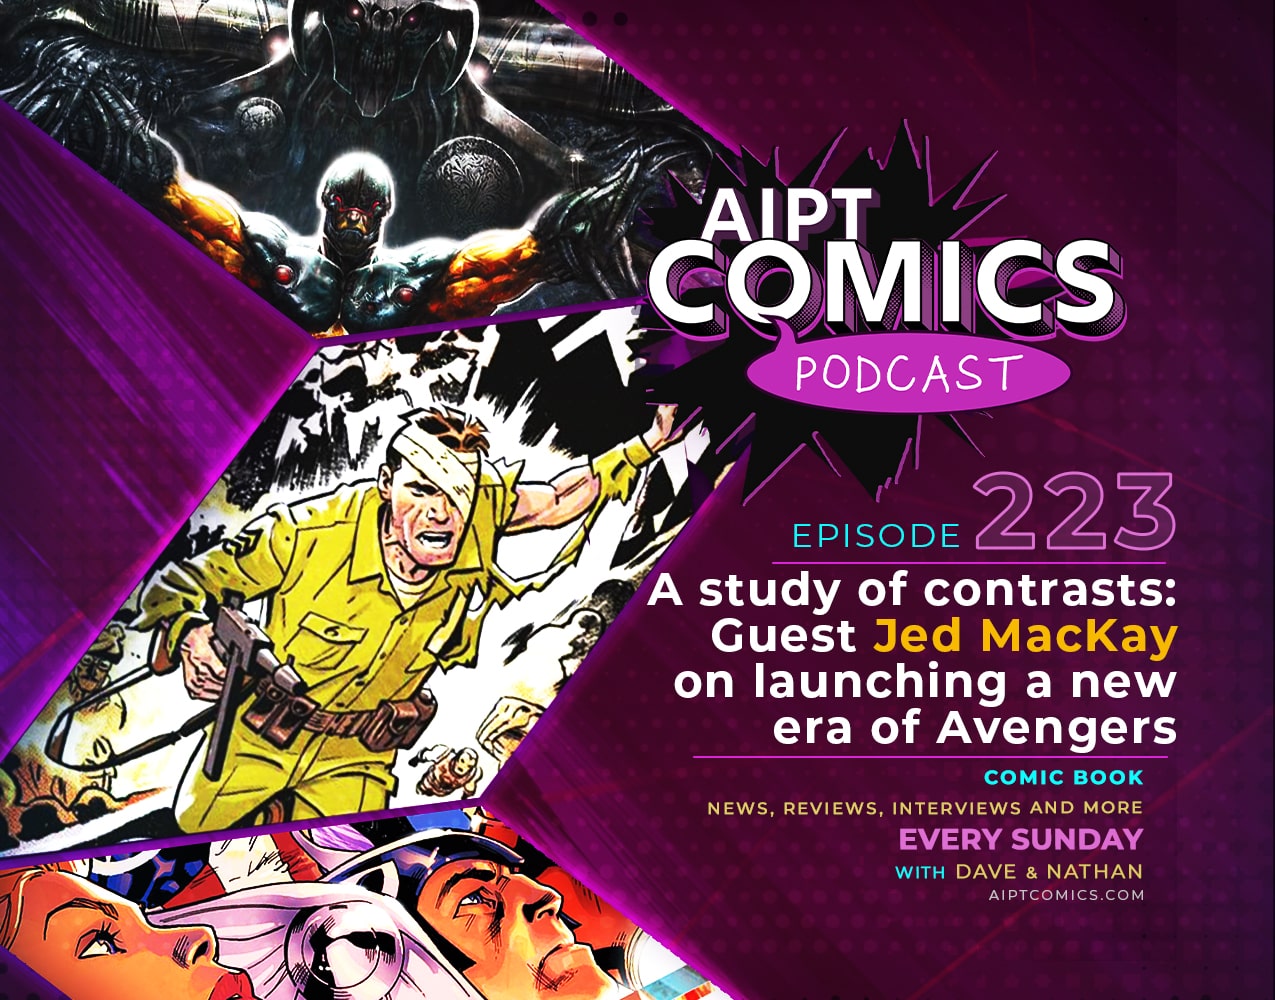 AIPT Comics Podcast episode 223: A study of contrasts: Guest Jed MacKay on launching a new era of Avengers